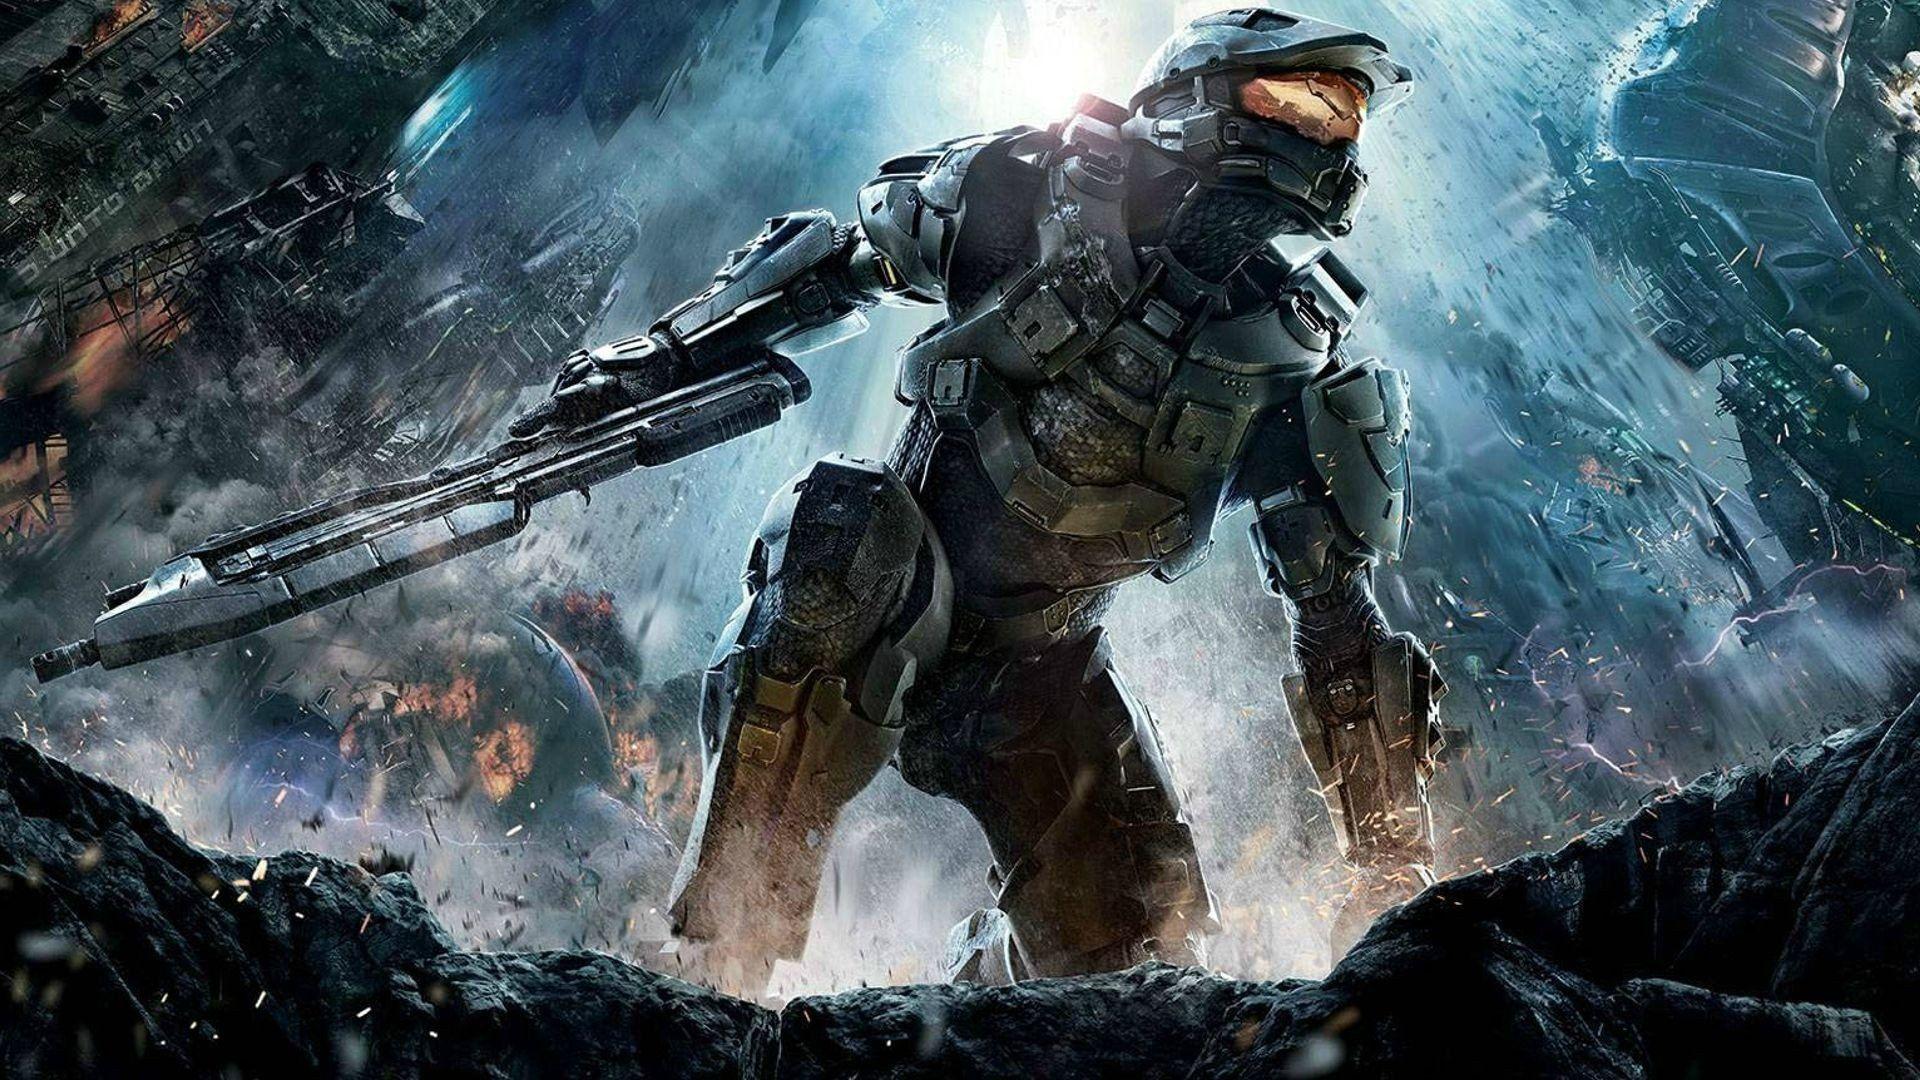 Halo 4 Xbox 360 Game wallpapers